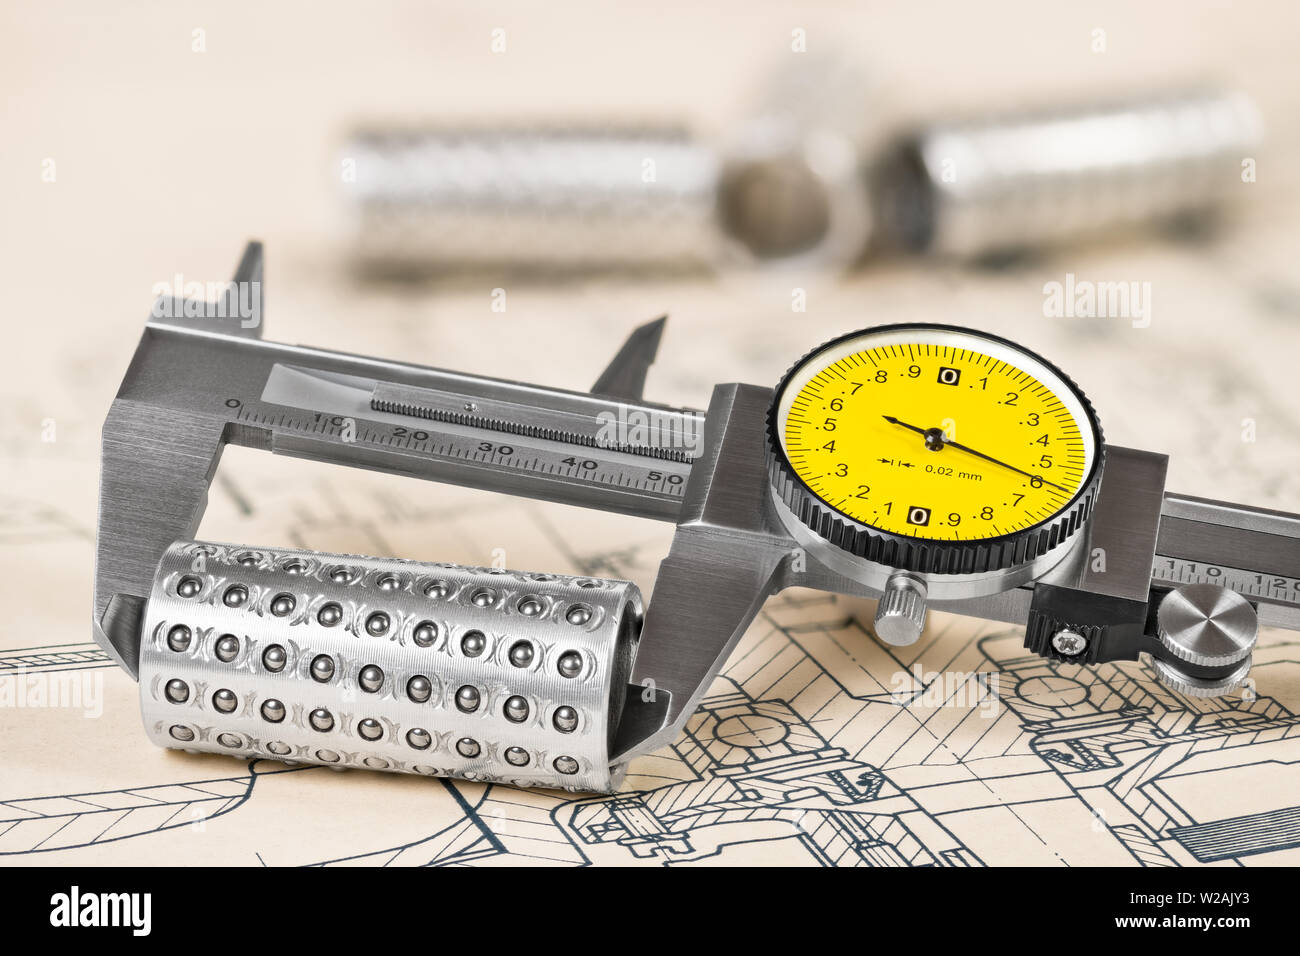 Caliper detail. Linear ball bearings and measuring tool. Technical document. Analog gauge. Round yellow dial and vernier scale. Plan, education study. Stock Photo